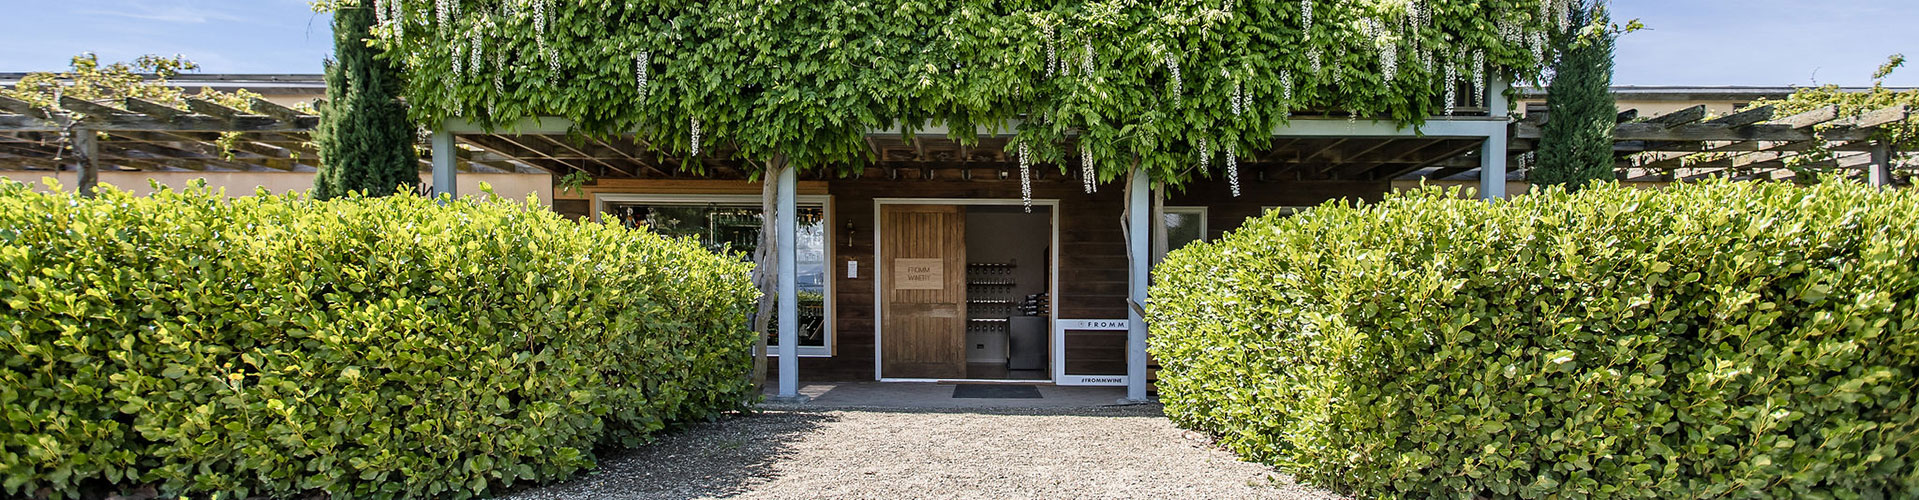 The entrance to the wine tasting room at Fromm Winery in Marlborough, New Zealand.